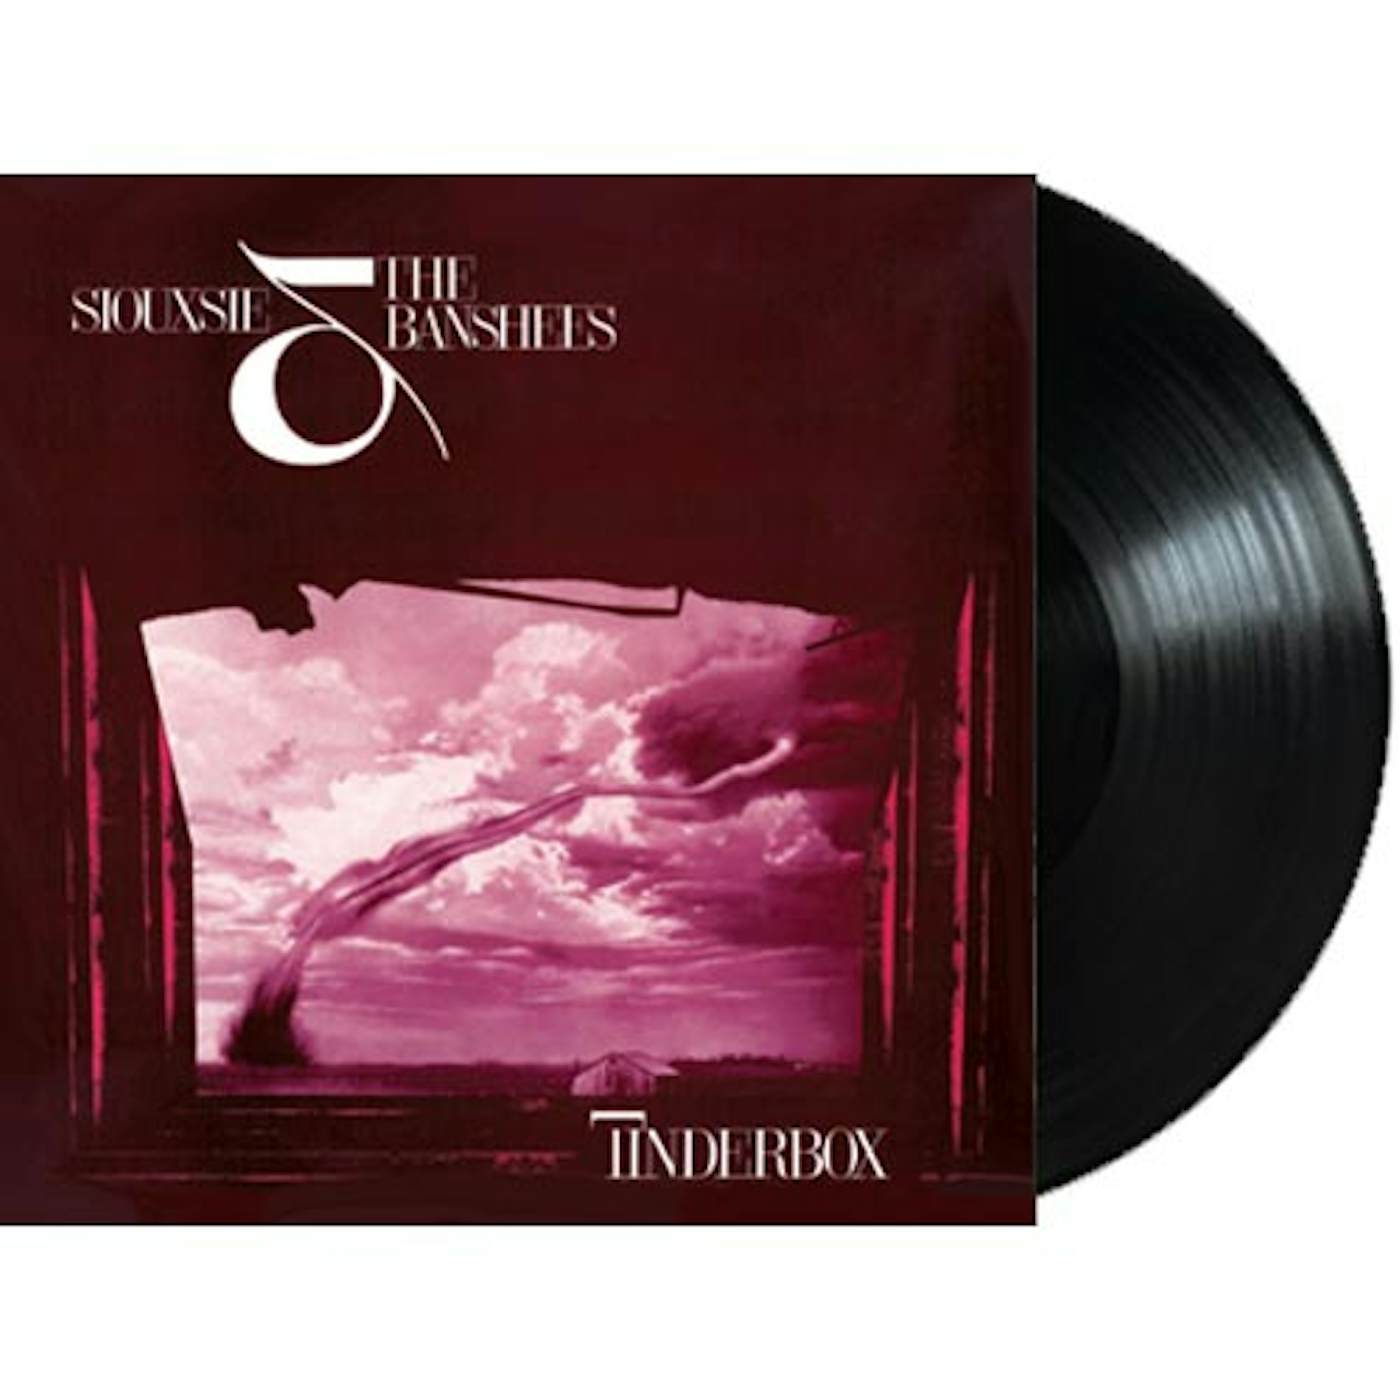 Siouxsie and the Banshees Tinderbox Vinyl Record